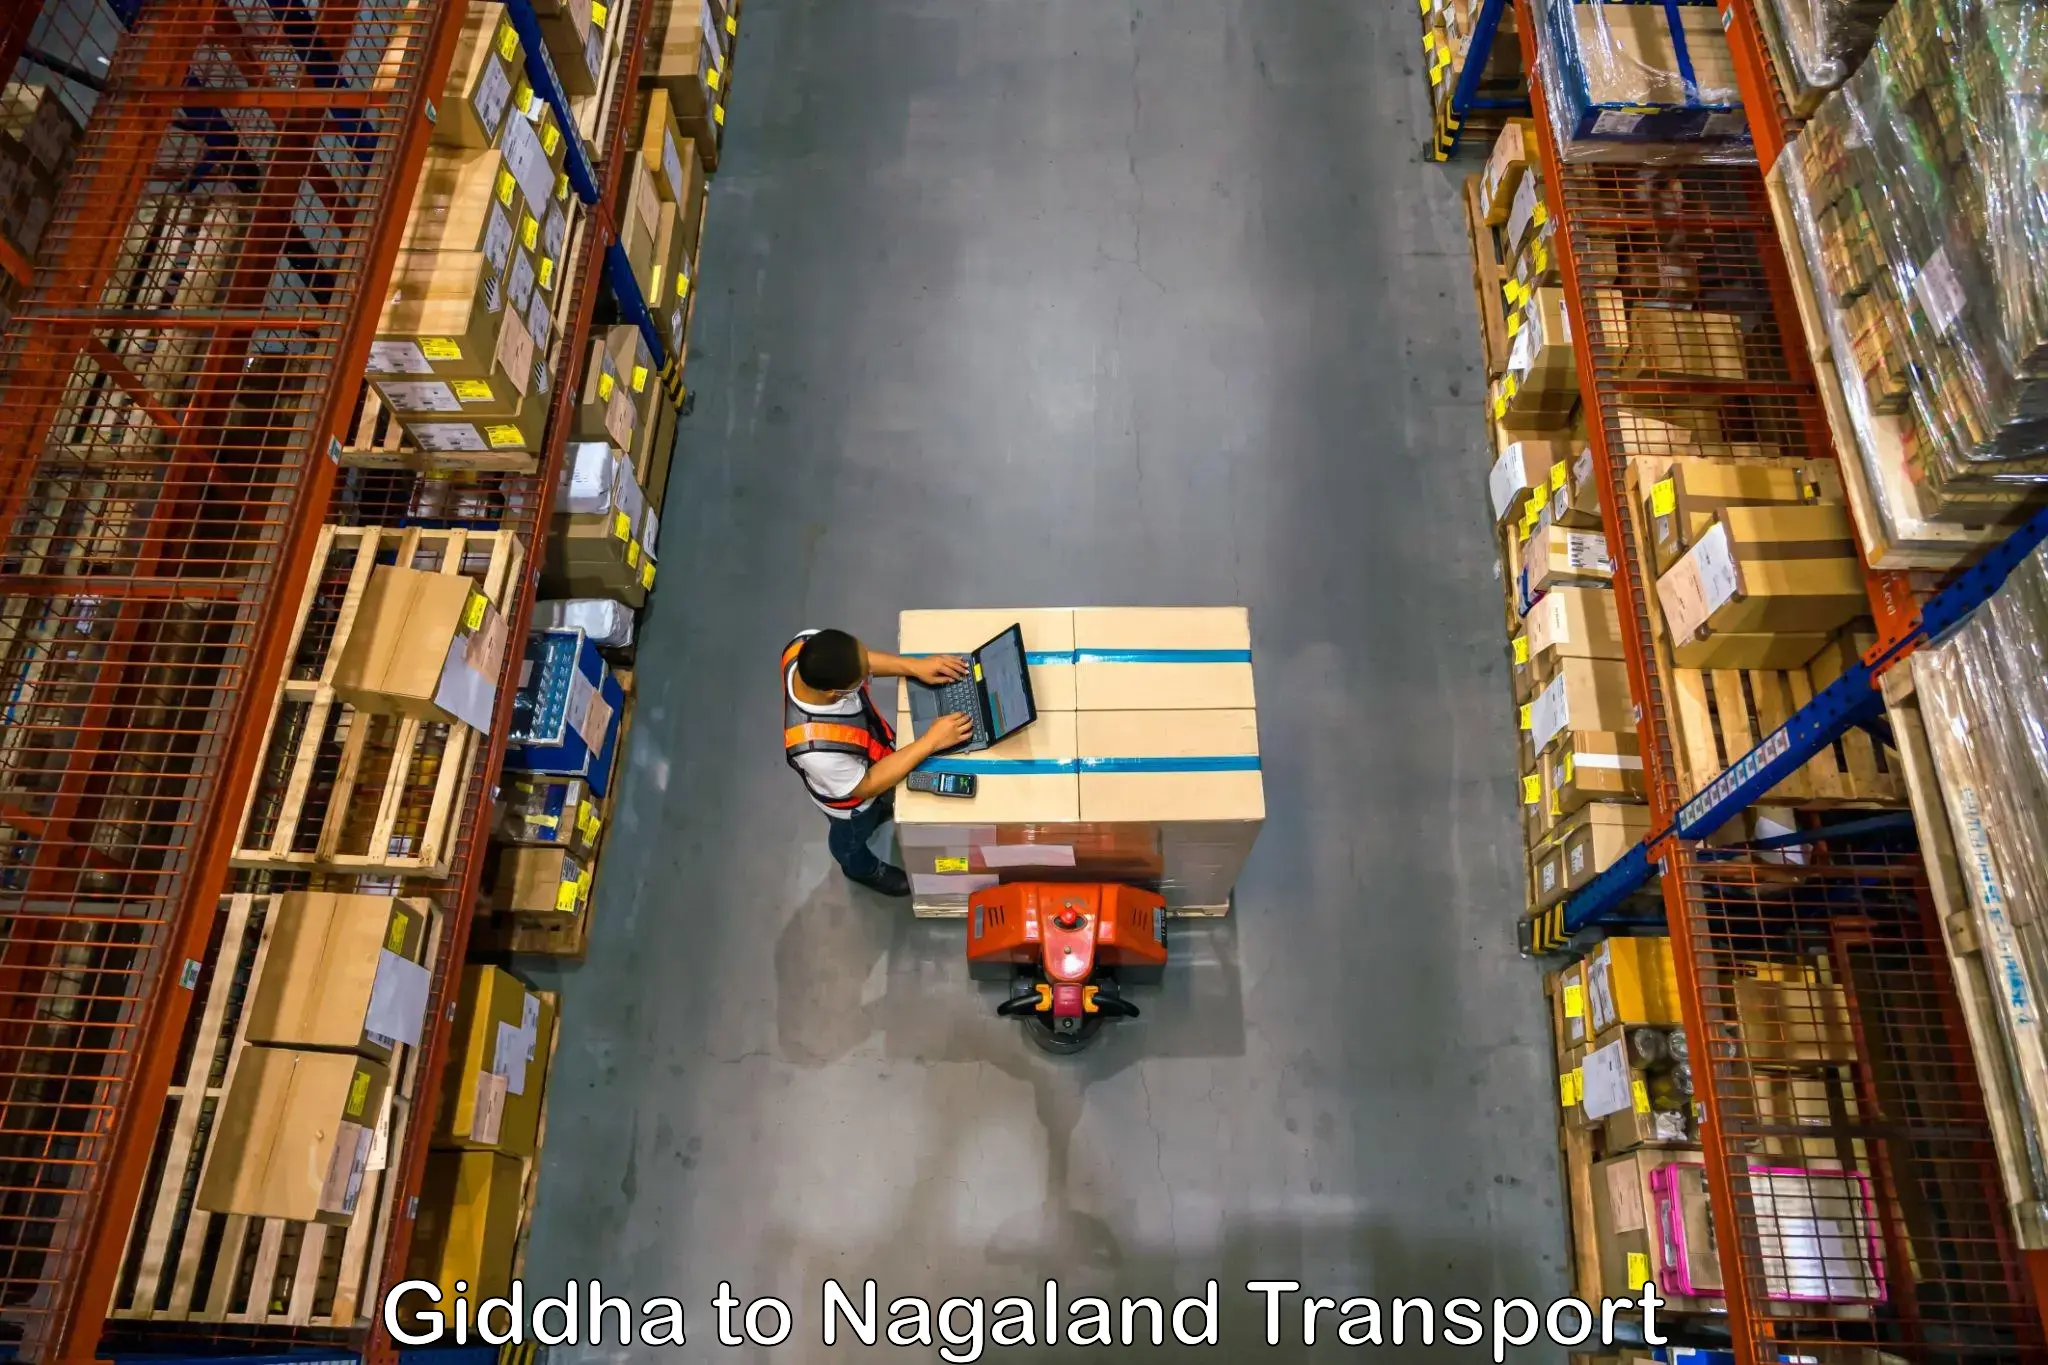 Transport shared services Giddha to Nagaland